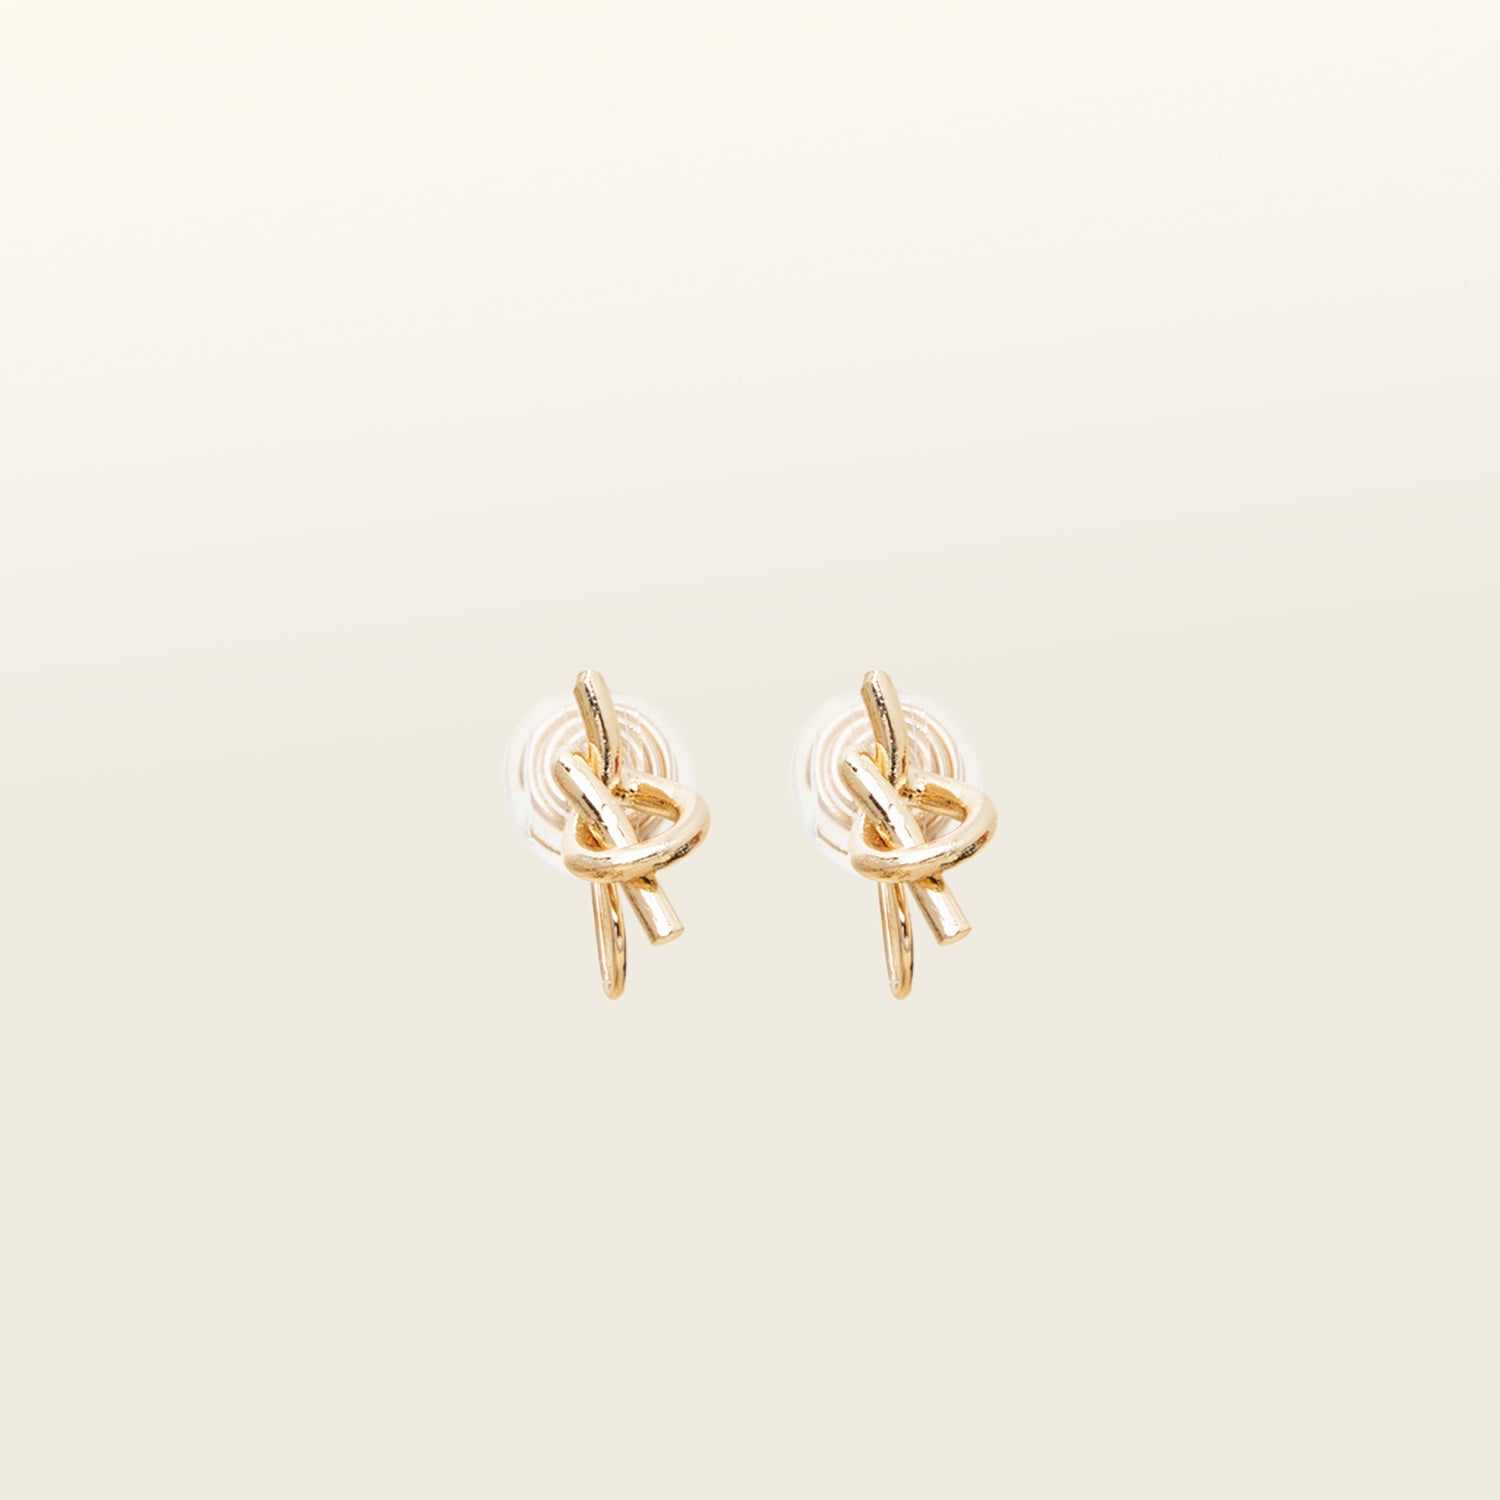 Image of the Knot Clip-On Earrings, a must-have accessory to elevate your style. These modern earrings are crafted from gold tone plated metal alloy, showcasing a chic knot shape. Designed for comfort, they come with a convenient mosquito coil closure and backings with paddings. With a perfect blend of classic and contemporary, these earrings add a touch of sophistication to any outfit, making them an essential addition to your jewelry collection.